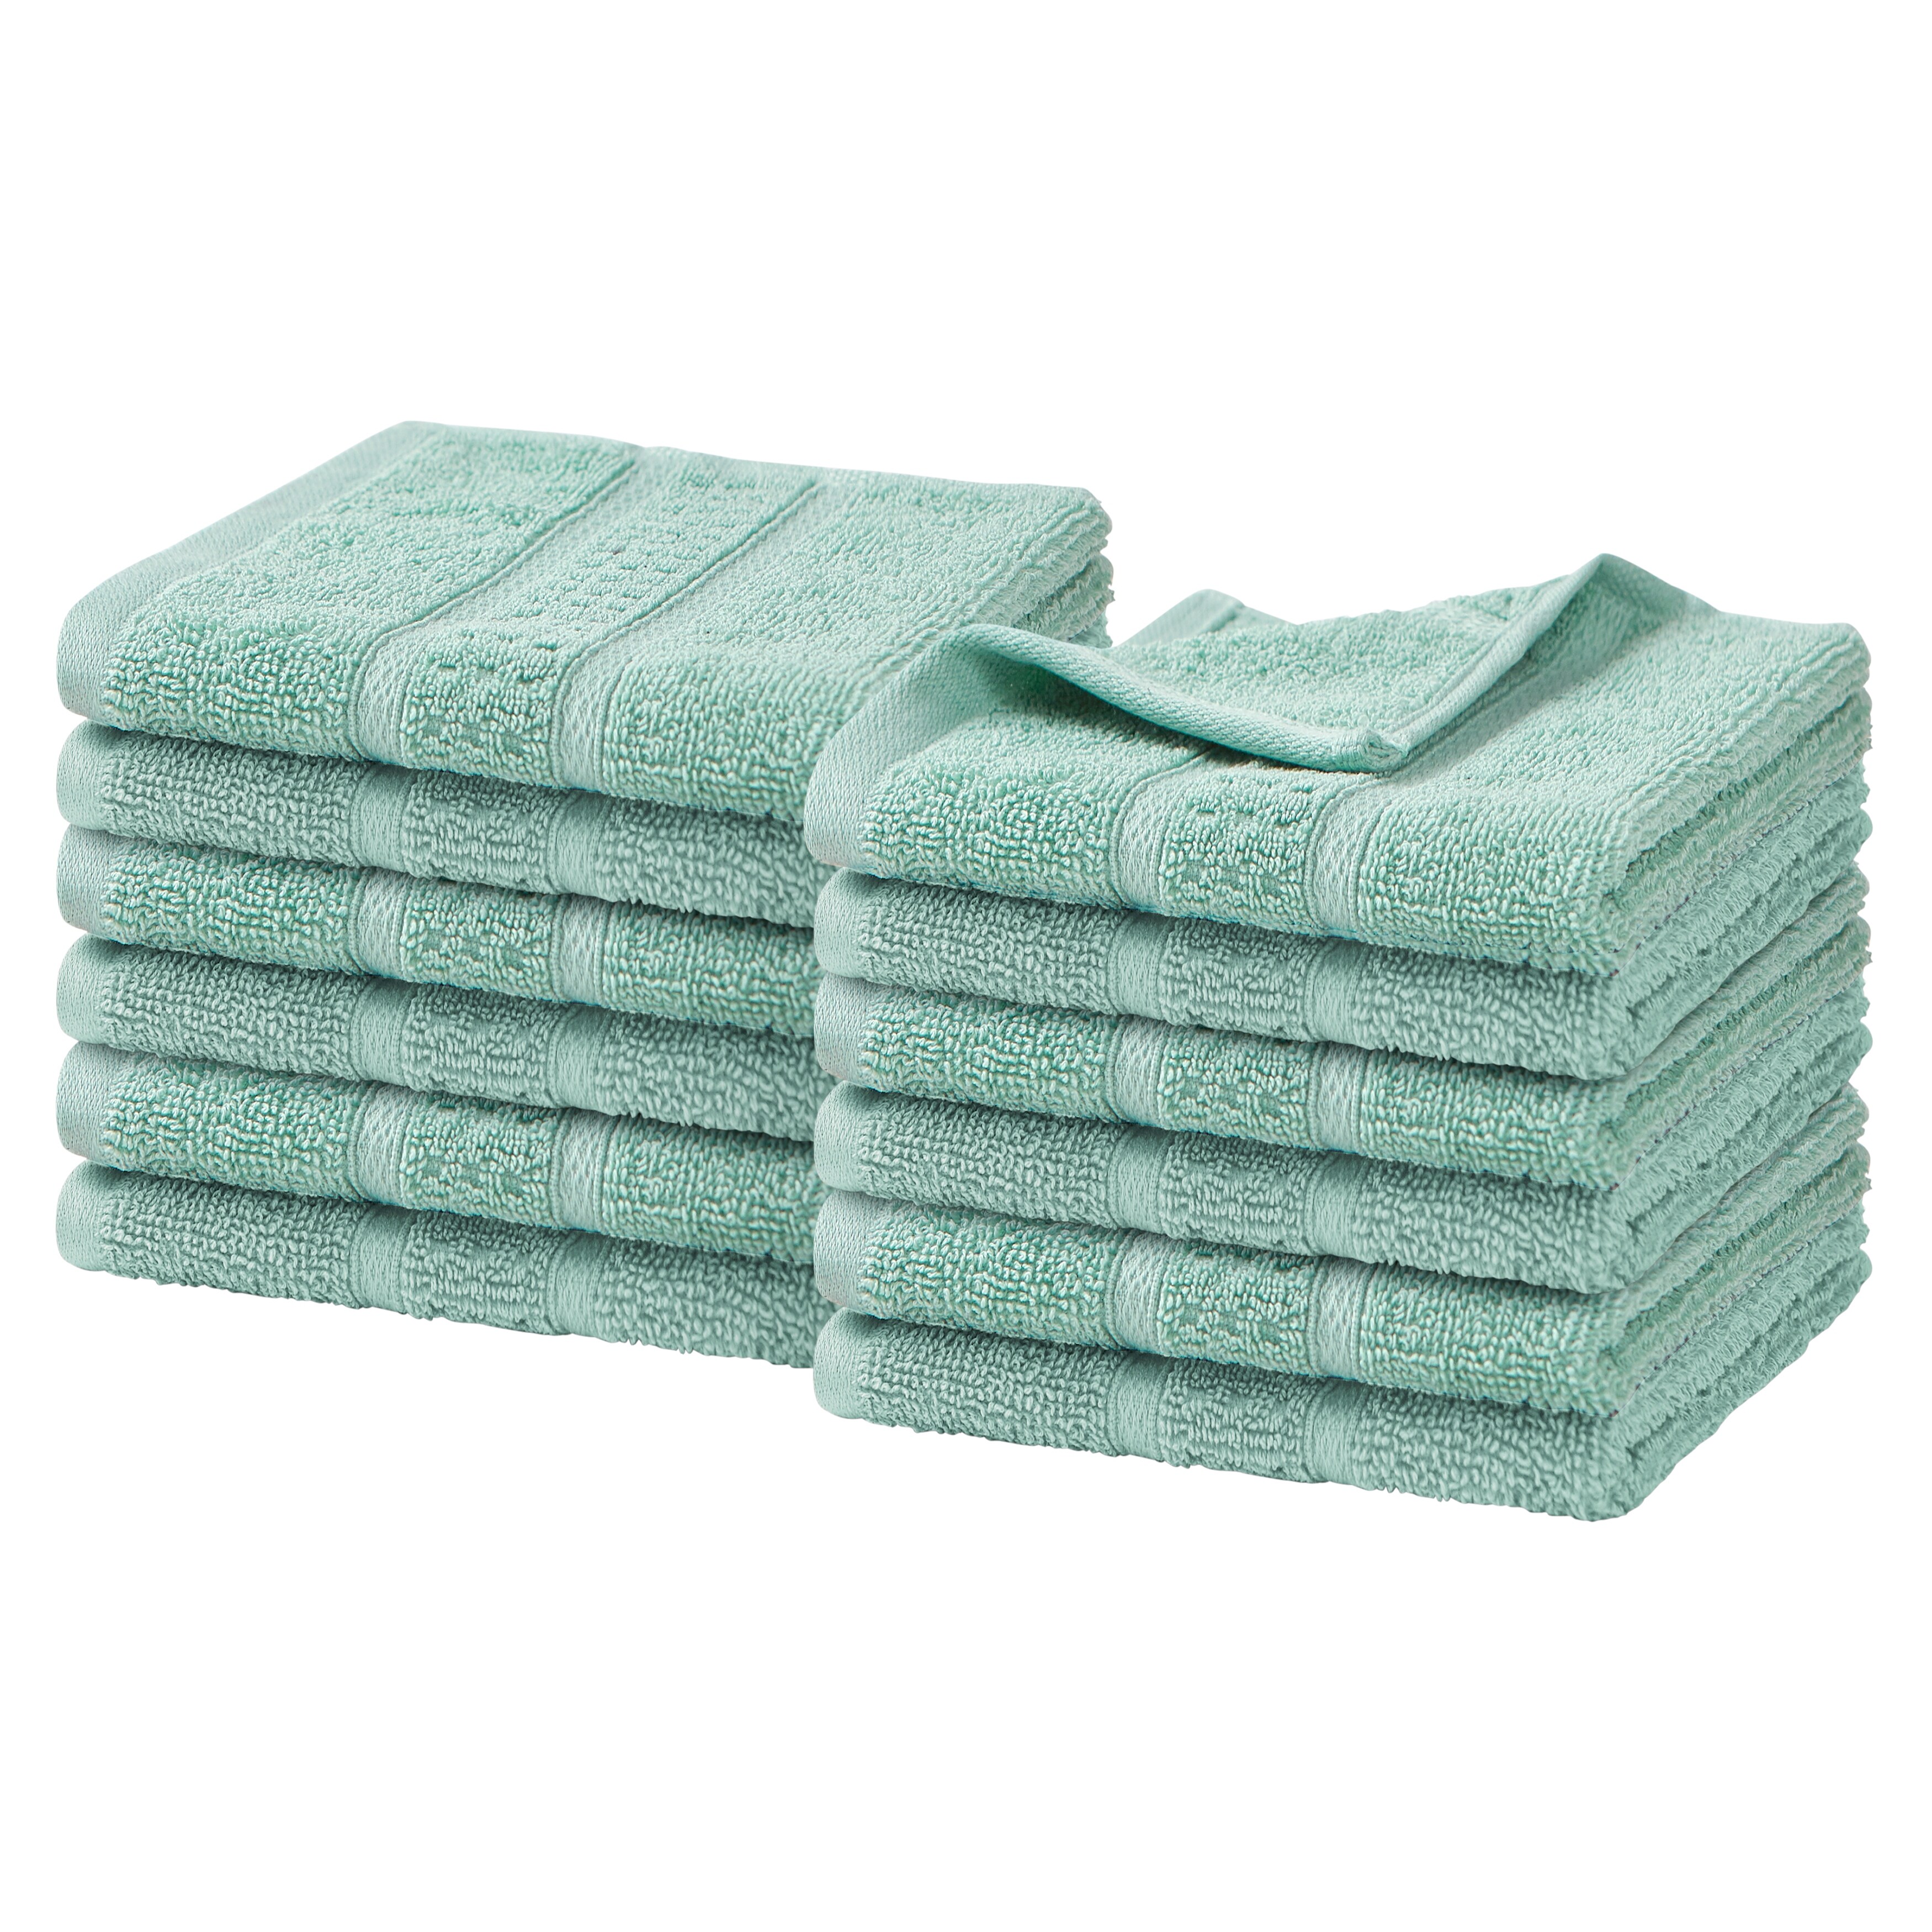 https://ak1.ostkcdn.com/images/products/is/images/direct/46f1230821efef5f87ce1fc7c23f5ec1436b1720/Nautica-Oceane-Solid-Wellness-Towel-Collection.jpg